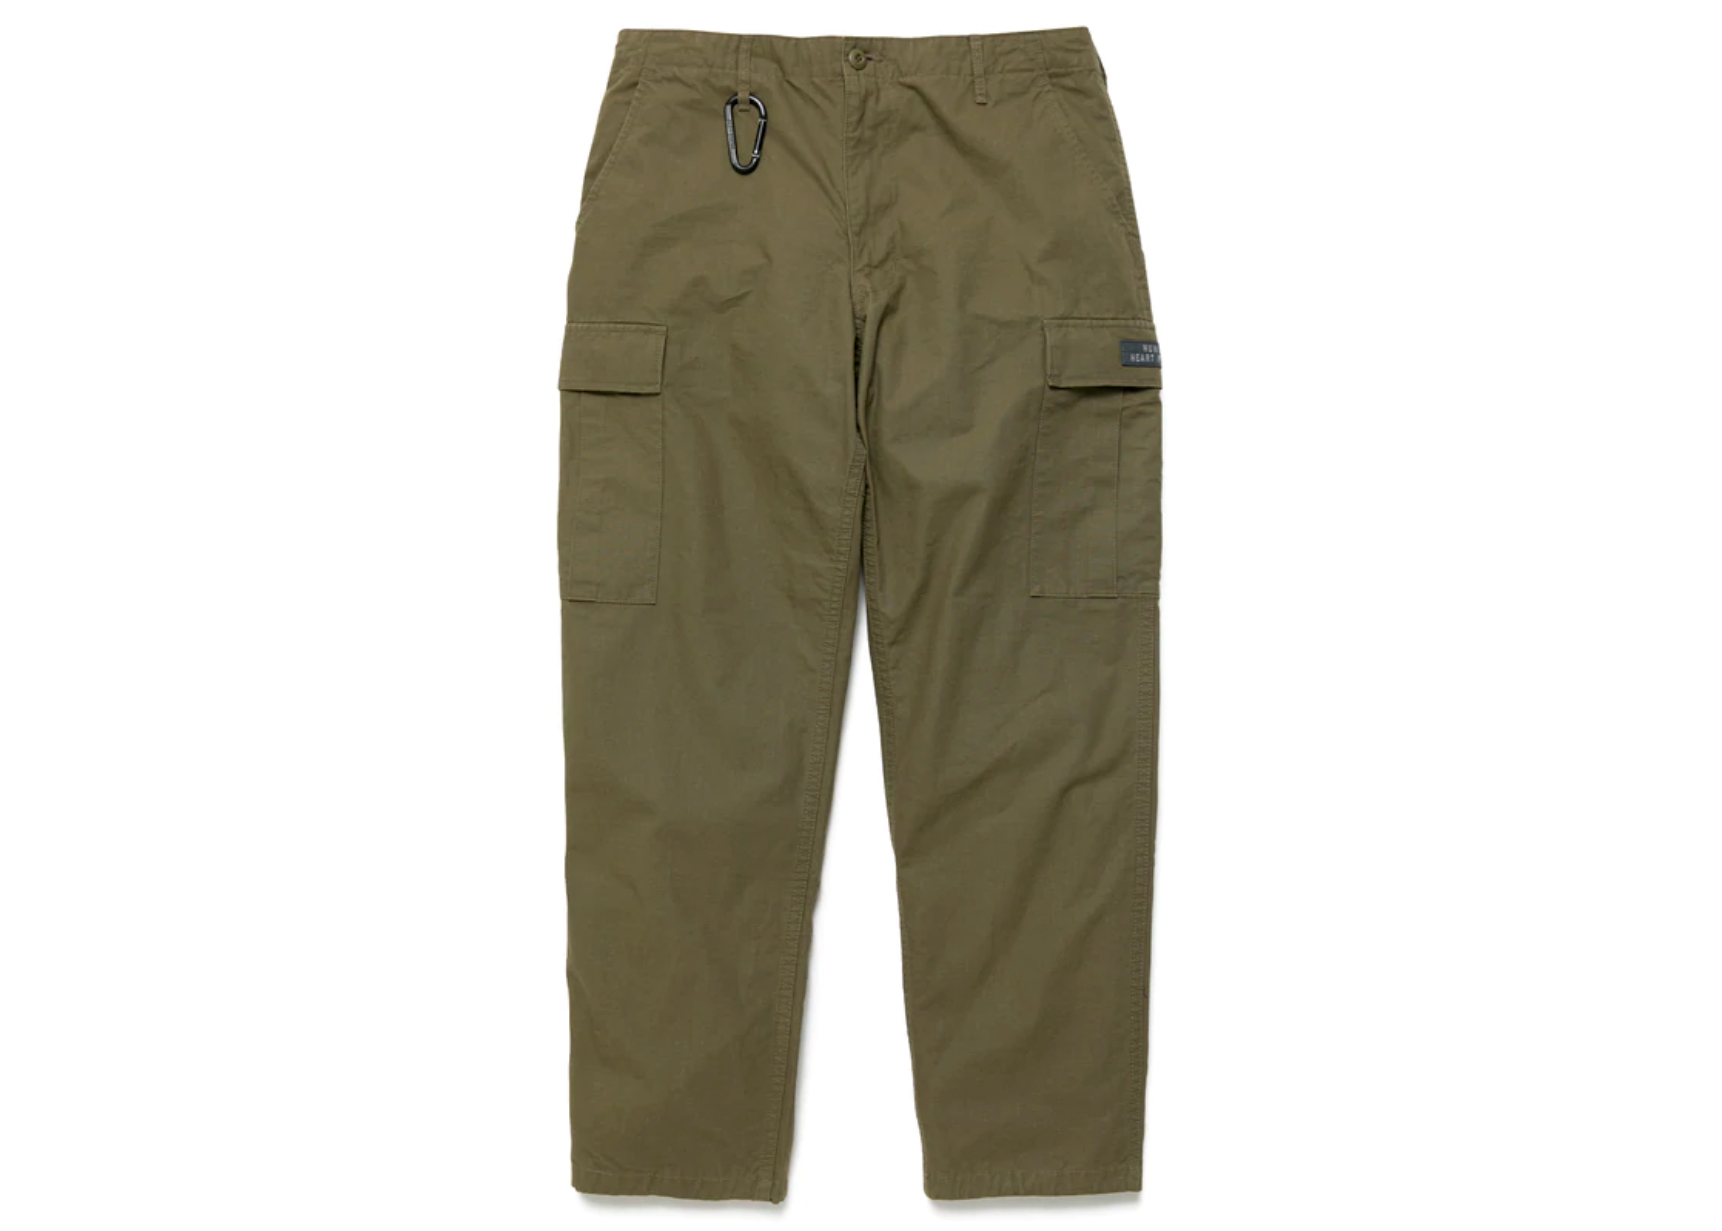 Human Made Cargo Pants Olive Drab Men's - SS22 - US